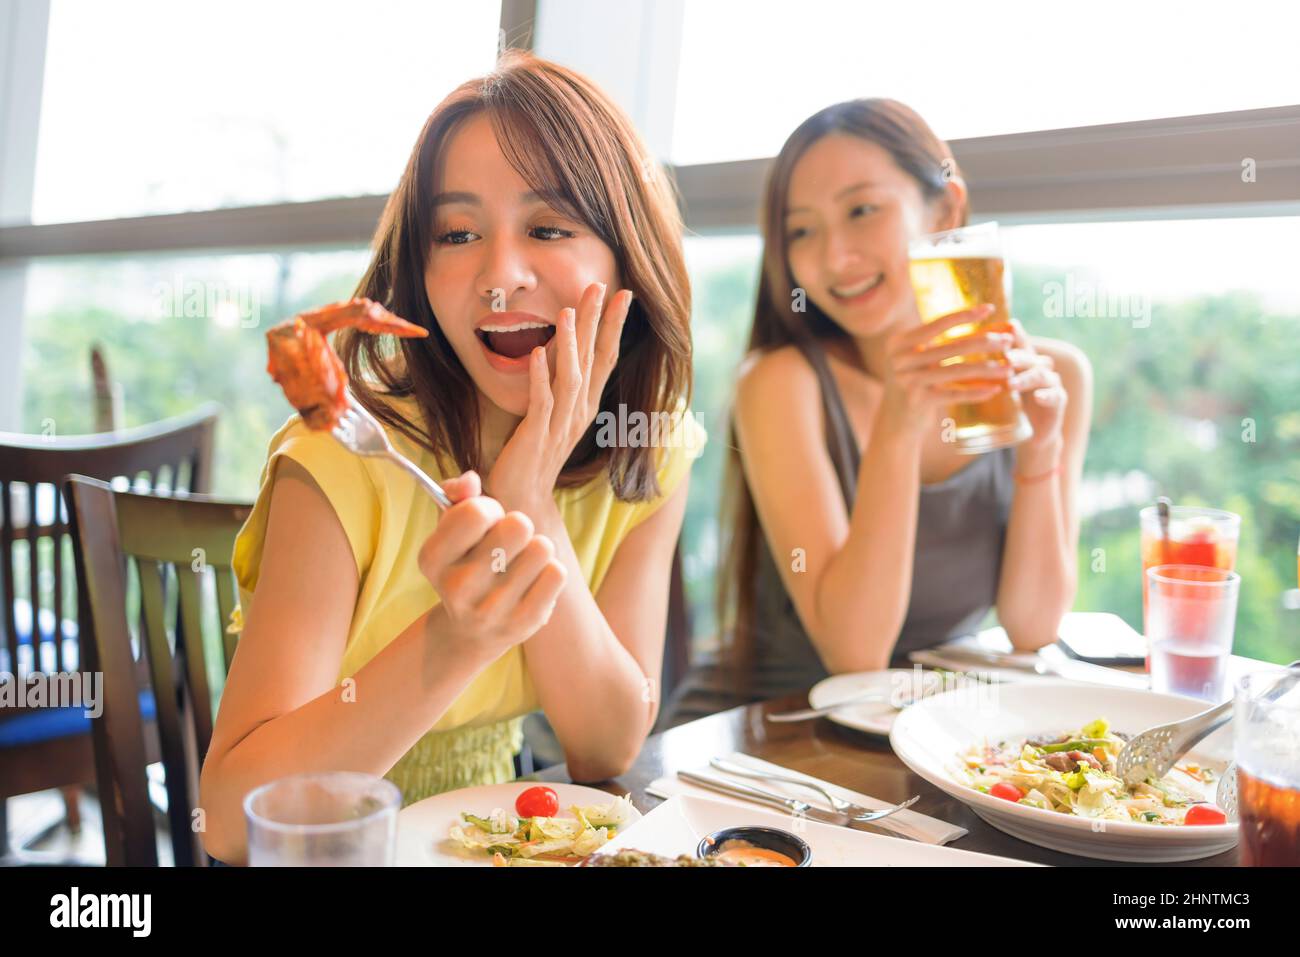 Happy  young woman enjoying food and drink in restaurant Stock Photo